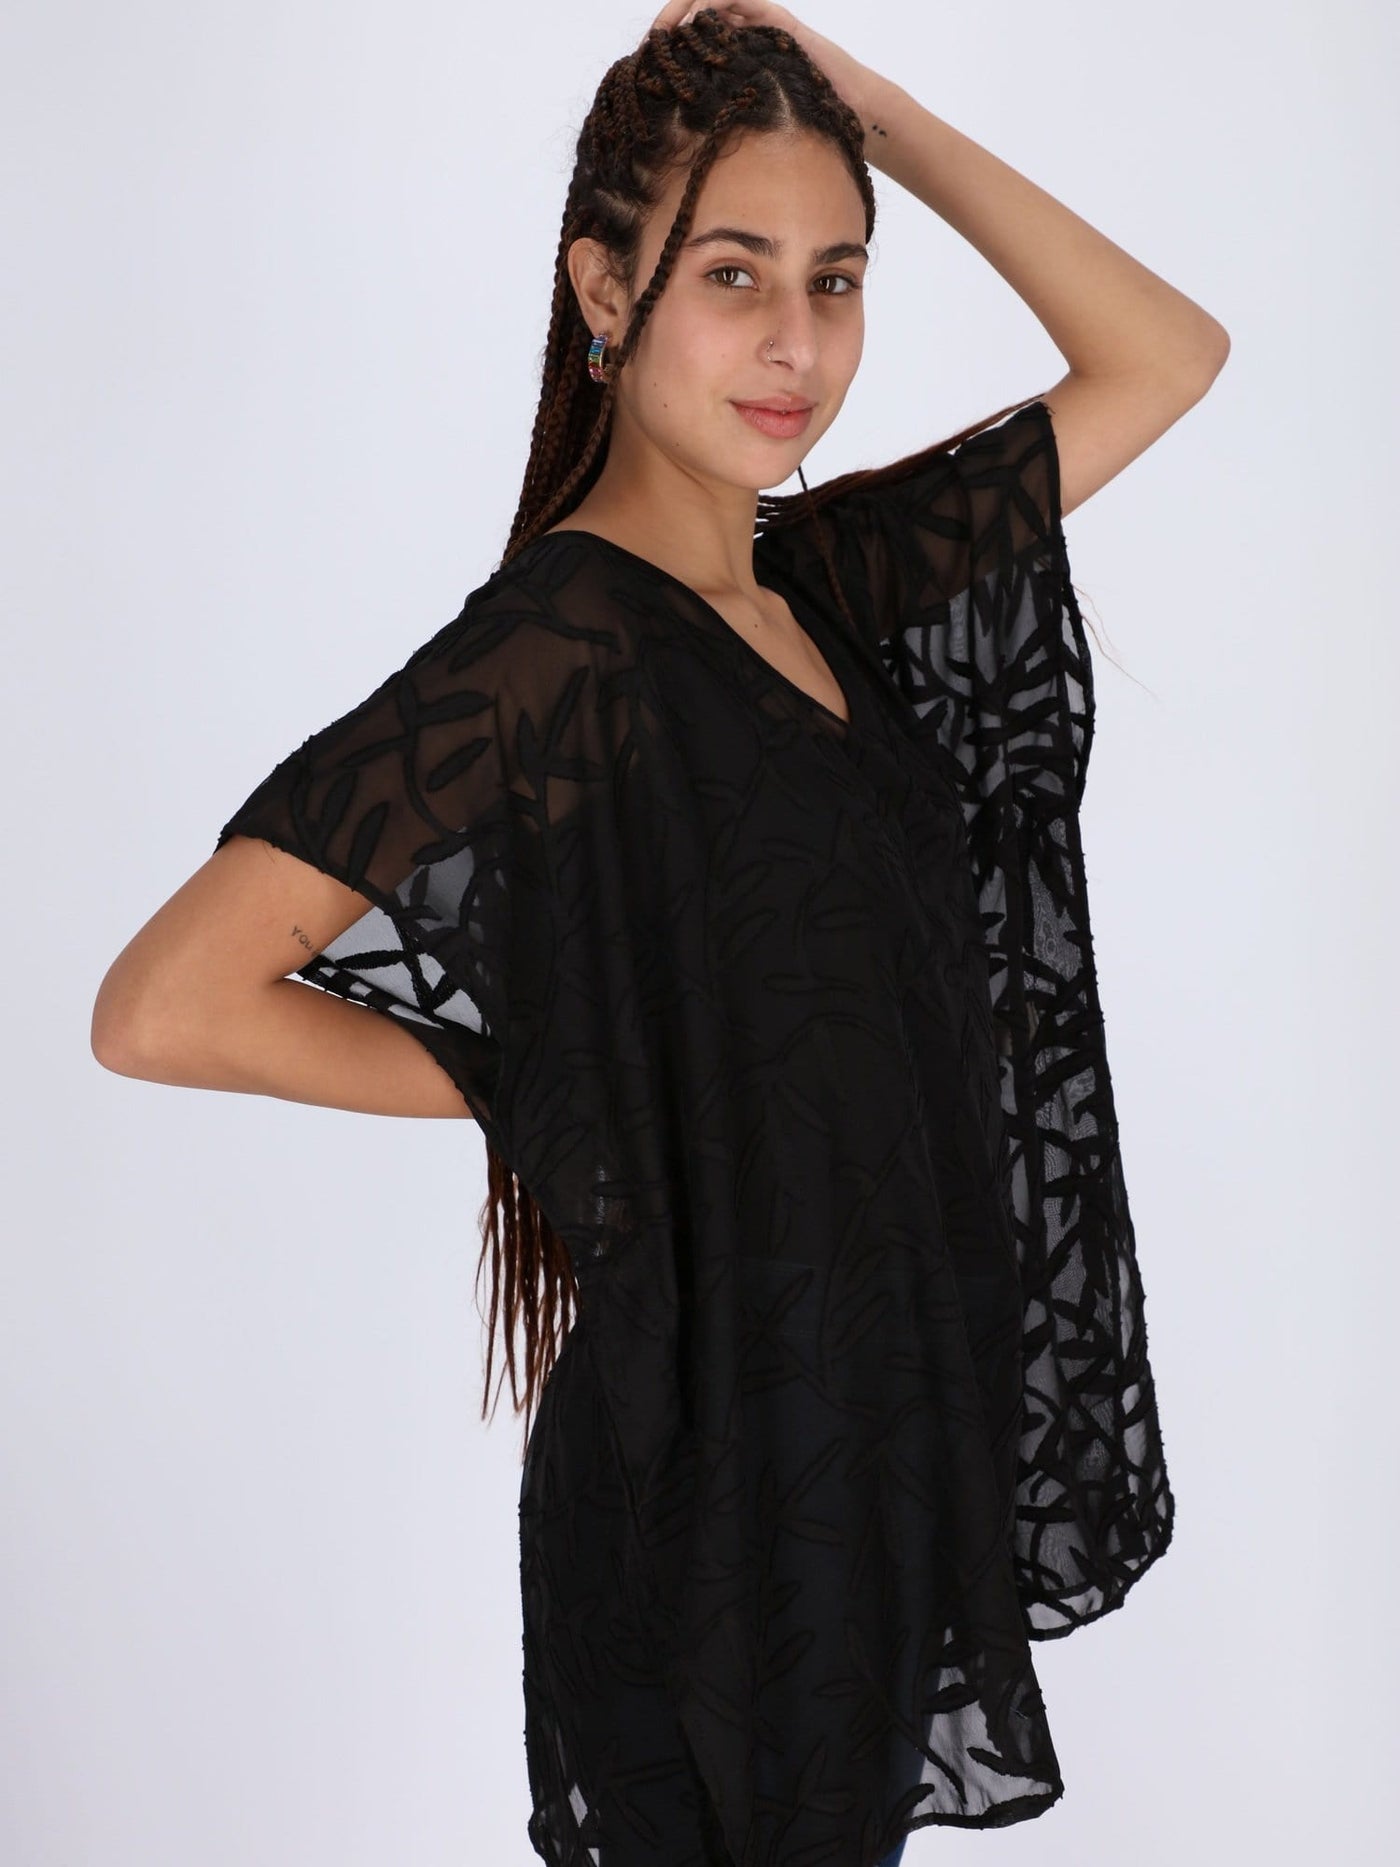 OR Swimwear Black / LXL Self Patterned Leaves Beach Cover-up